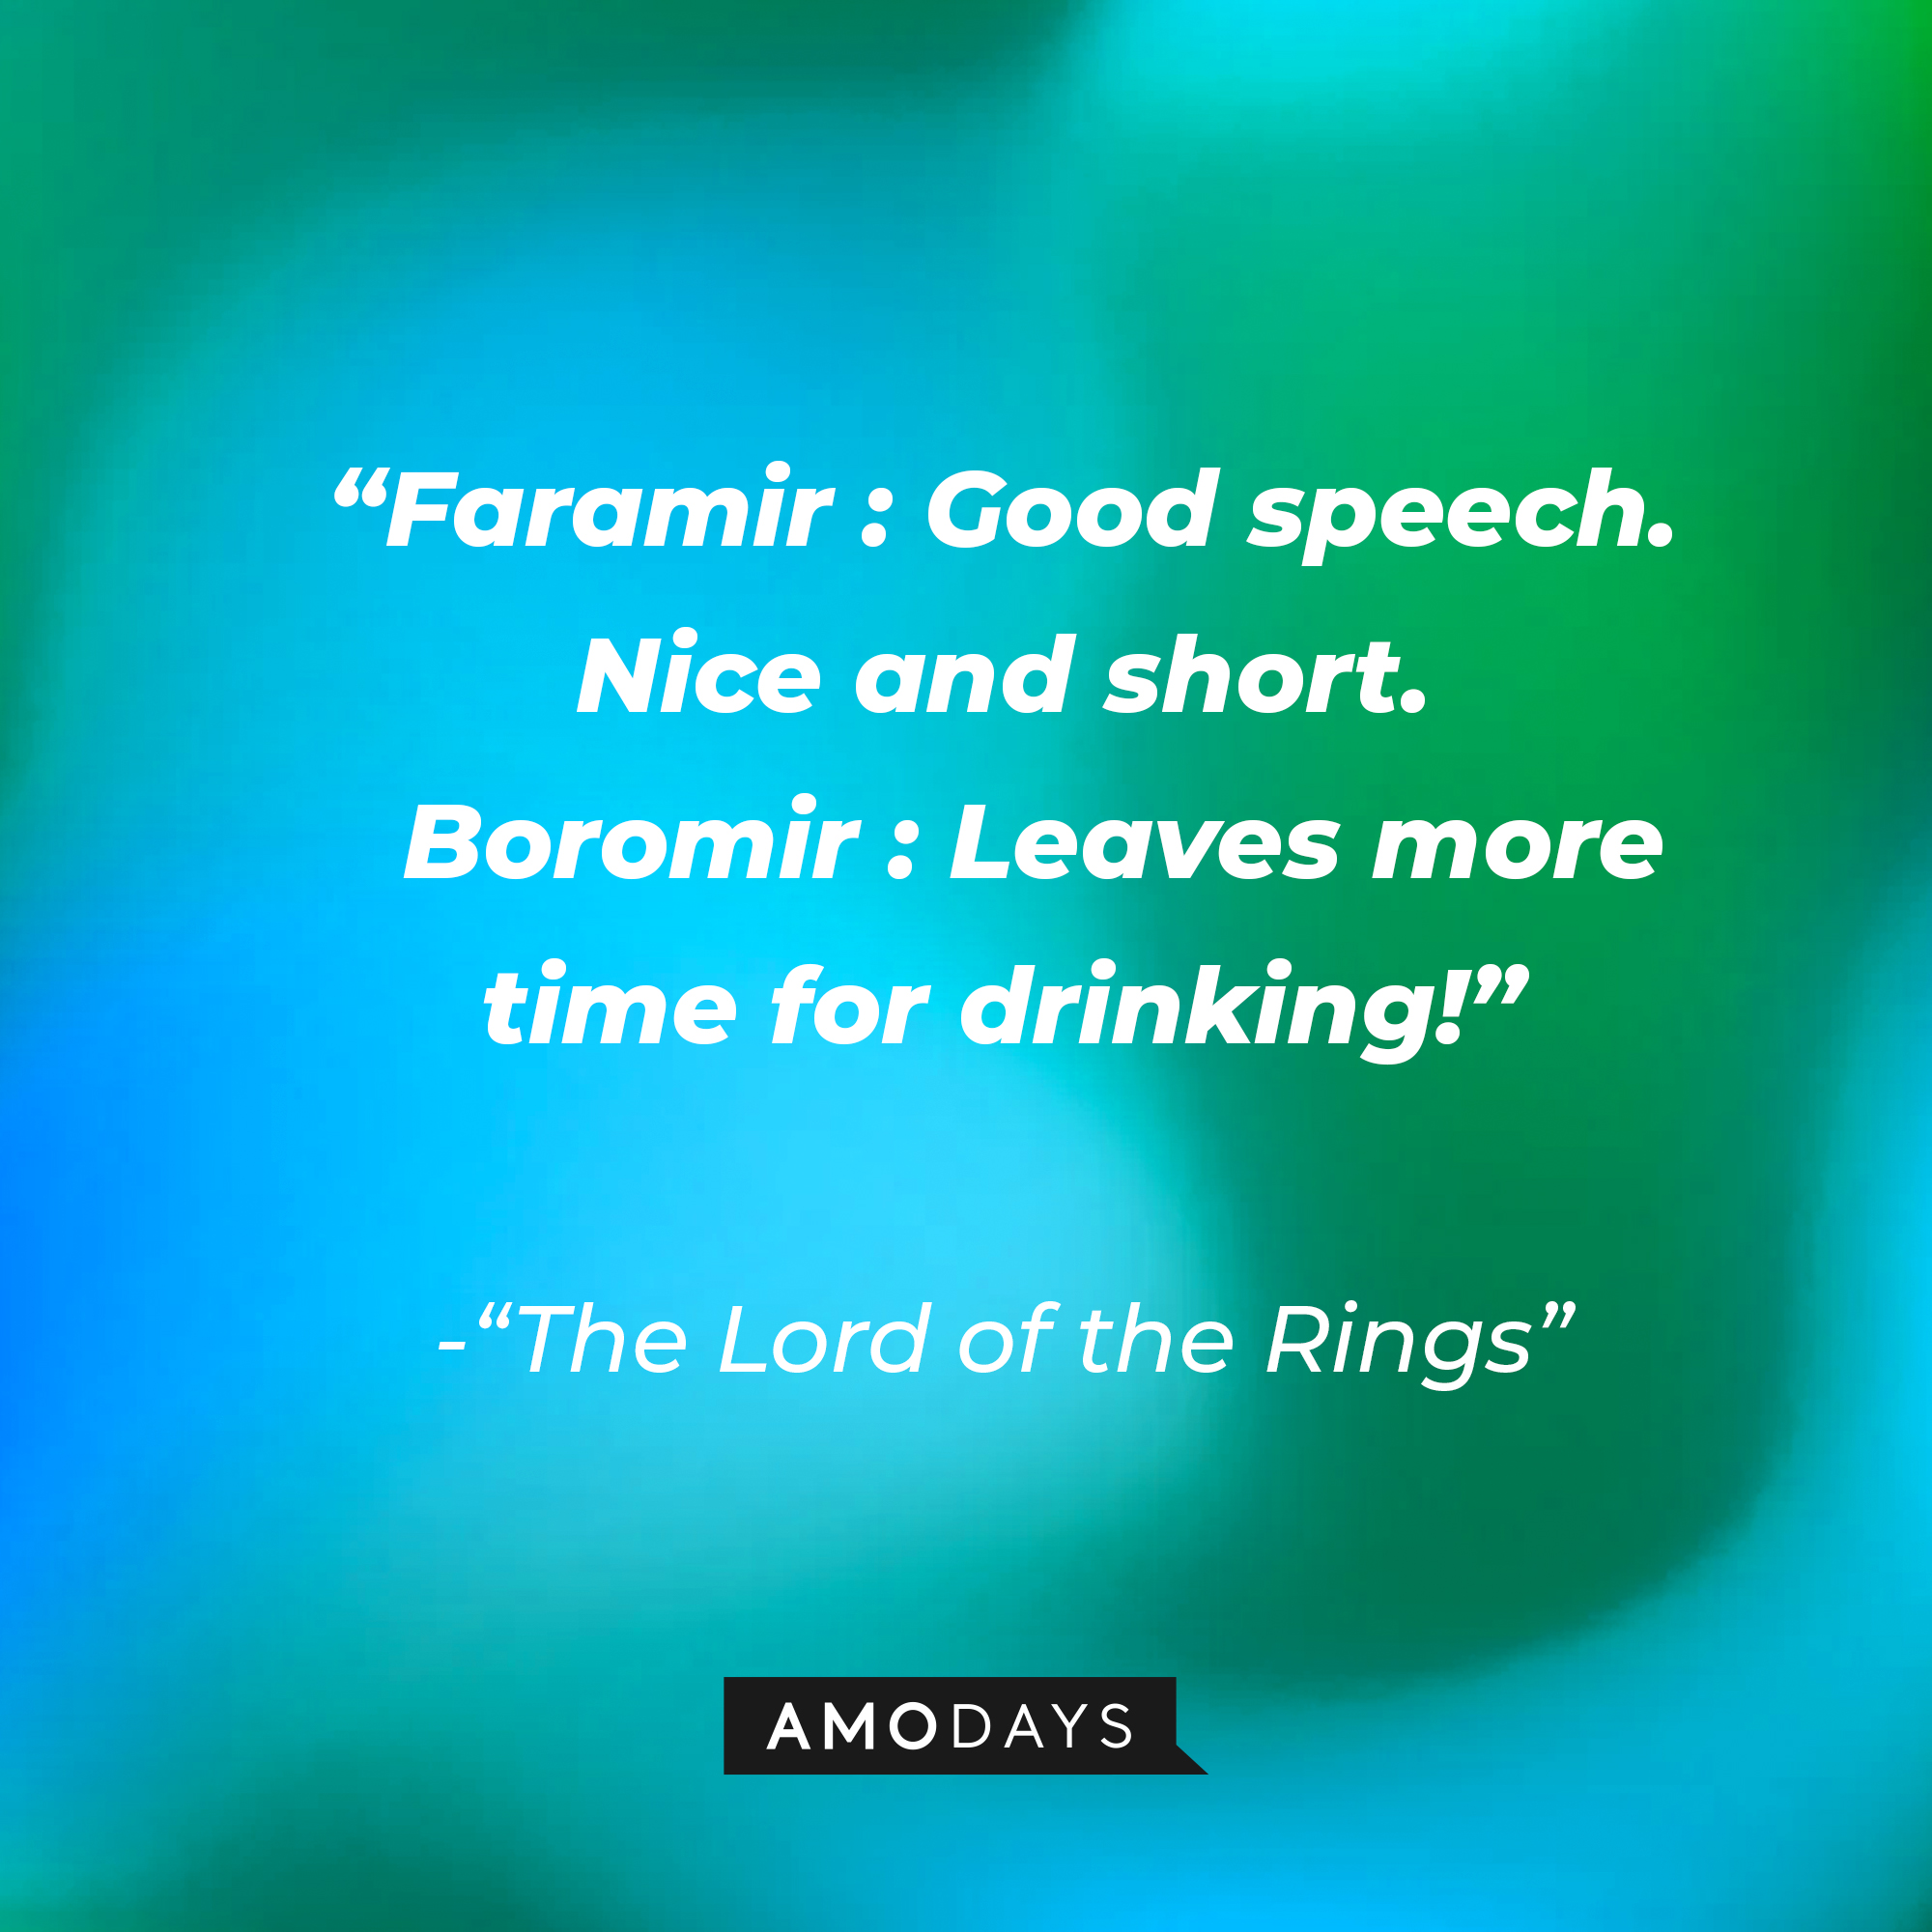 Quote from "The Lord of the Rings": "Faramir : Good speech. Nice and short. Boromir : Leaves more time for drinking!" | Source: AmoDays